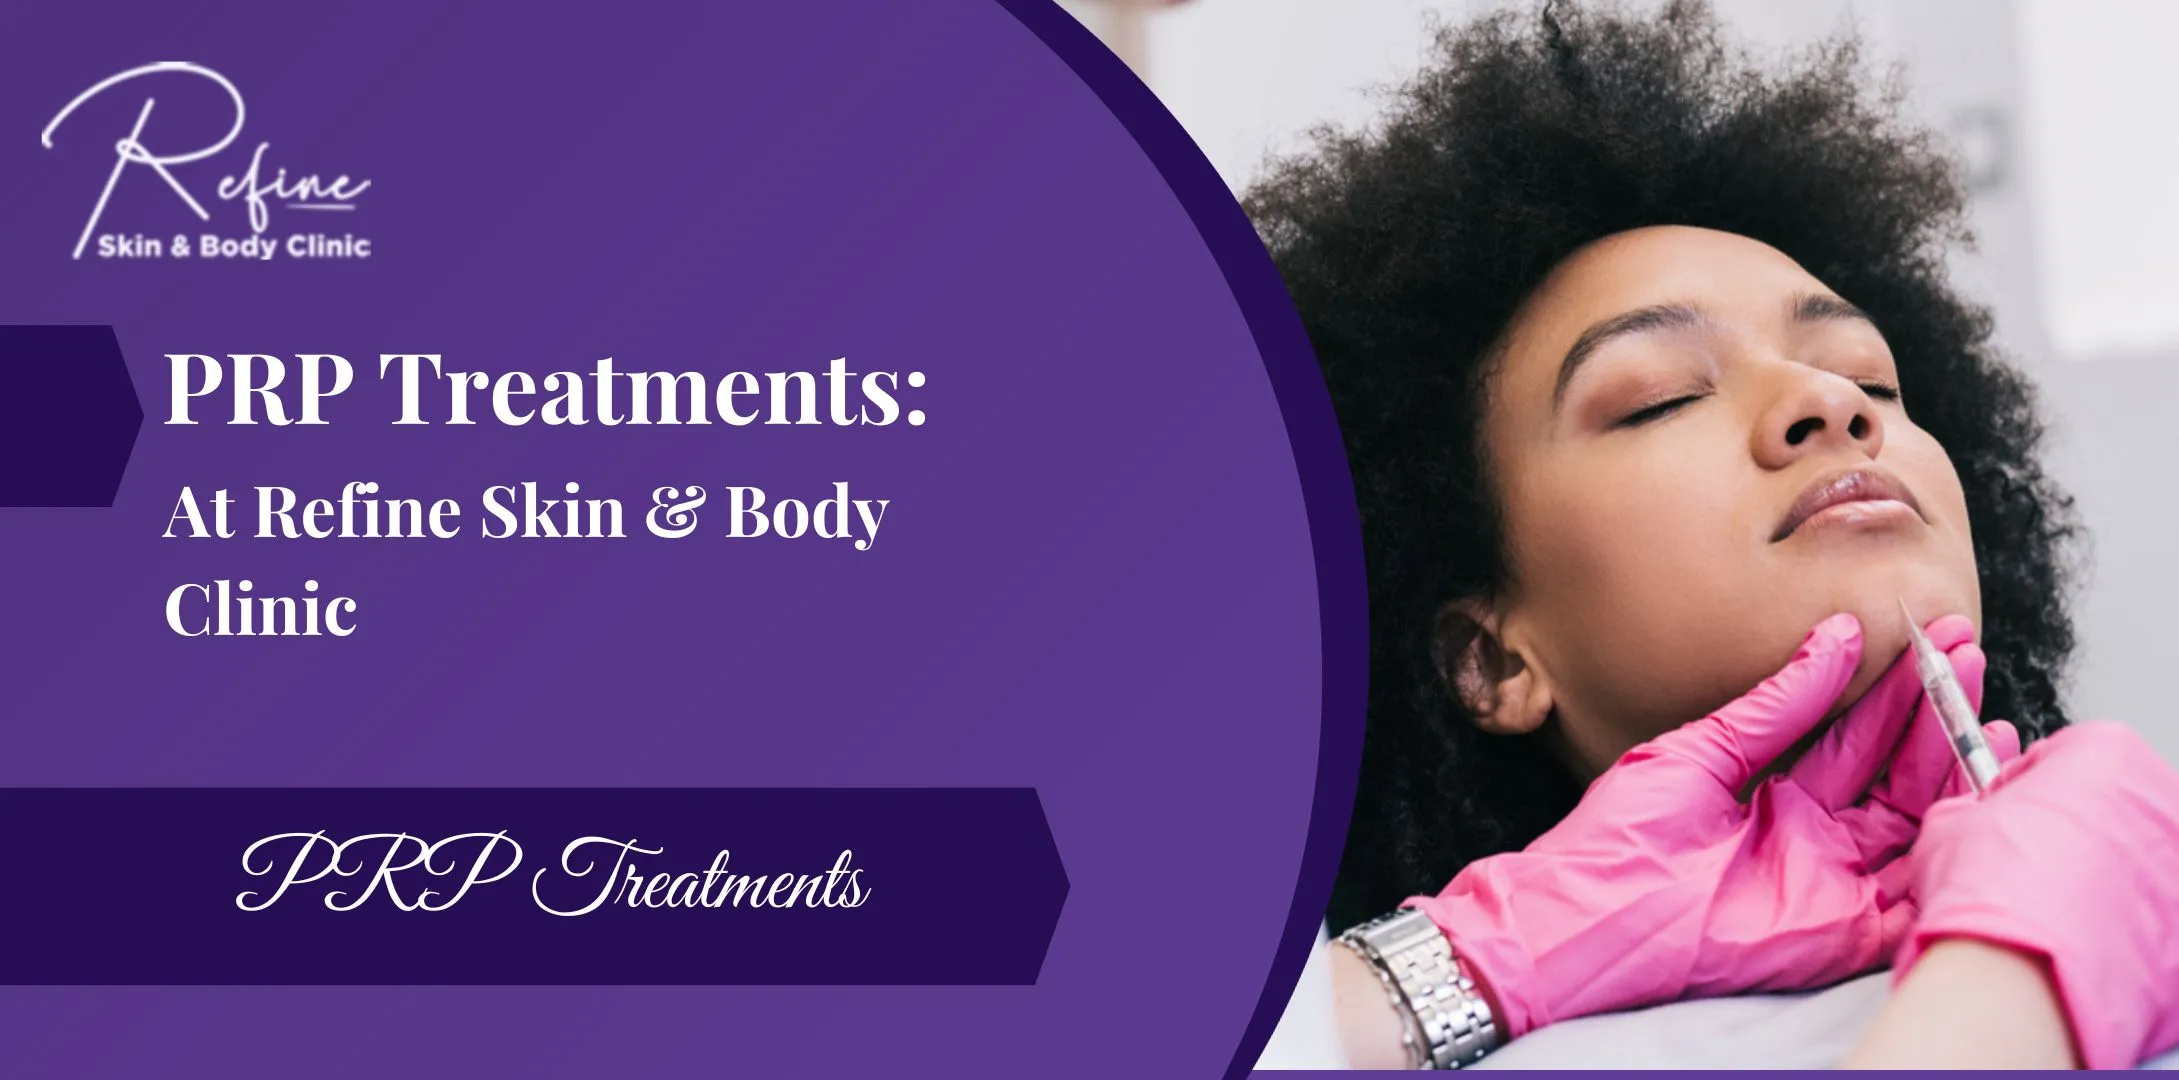 PRP Treatments at Refine Skin and Body Clinic